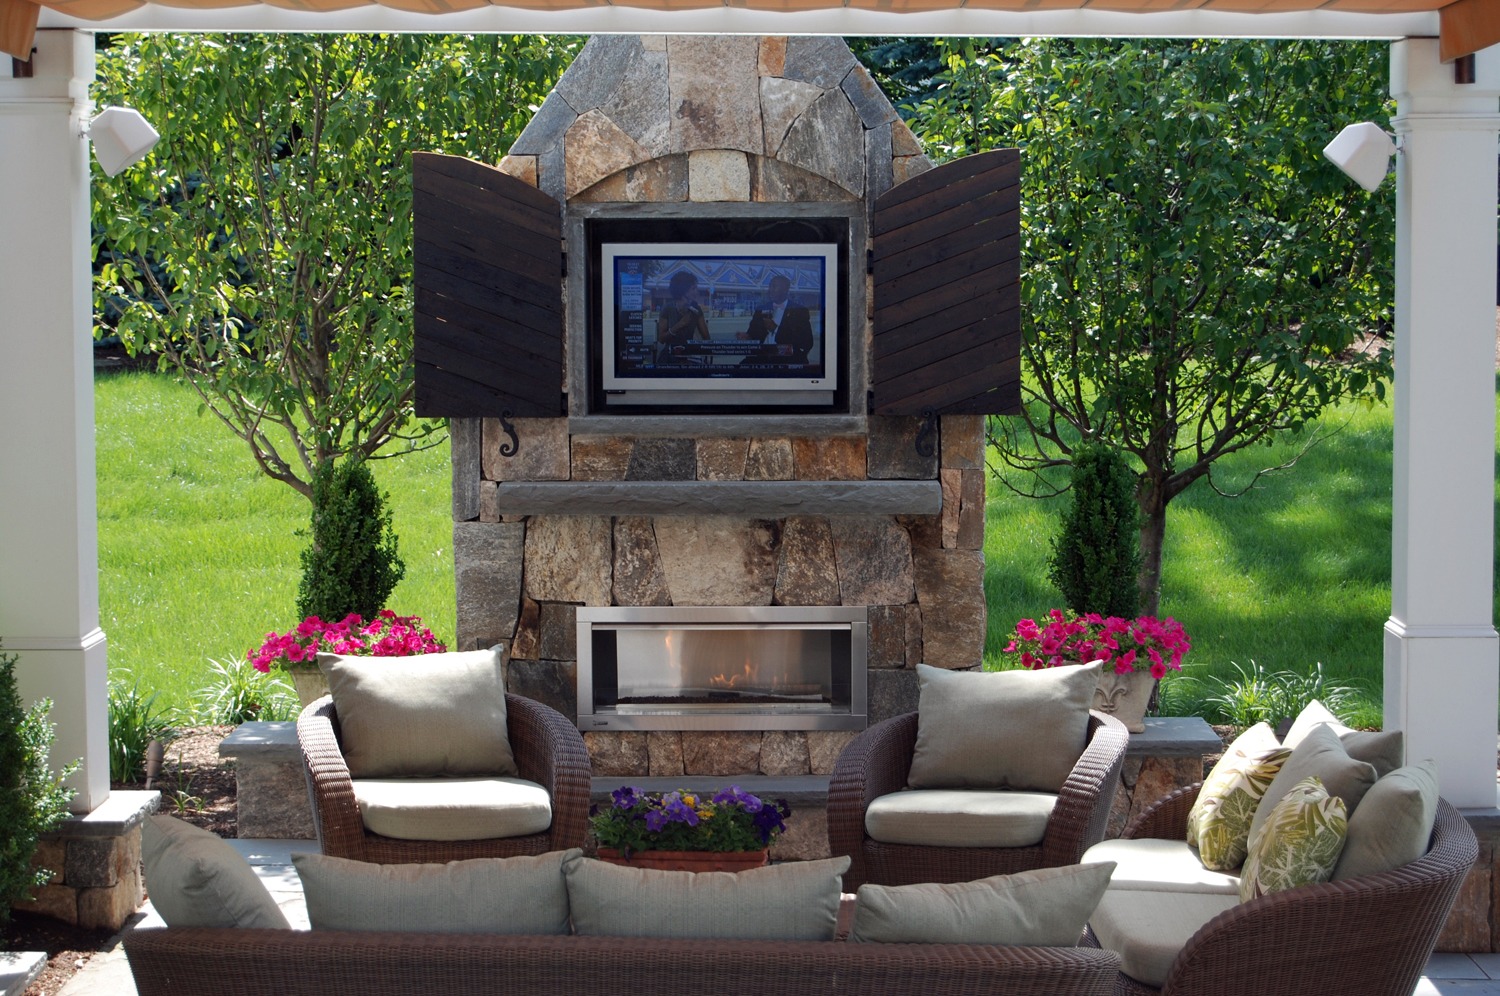 An outdoor sitting area with comfortable furniture, a stone fireplace, a mounted television, and vibrant plants, set against a verdant lawn backdrop.